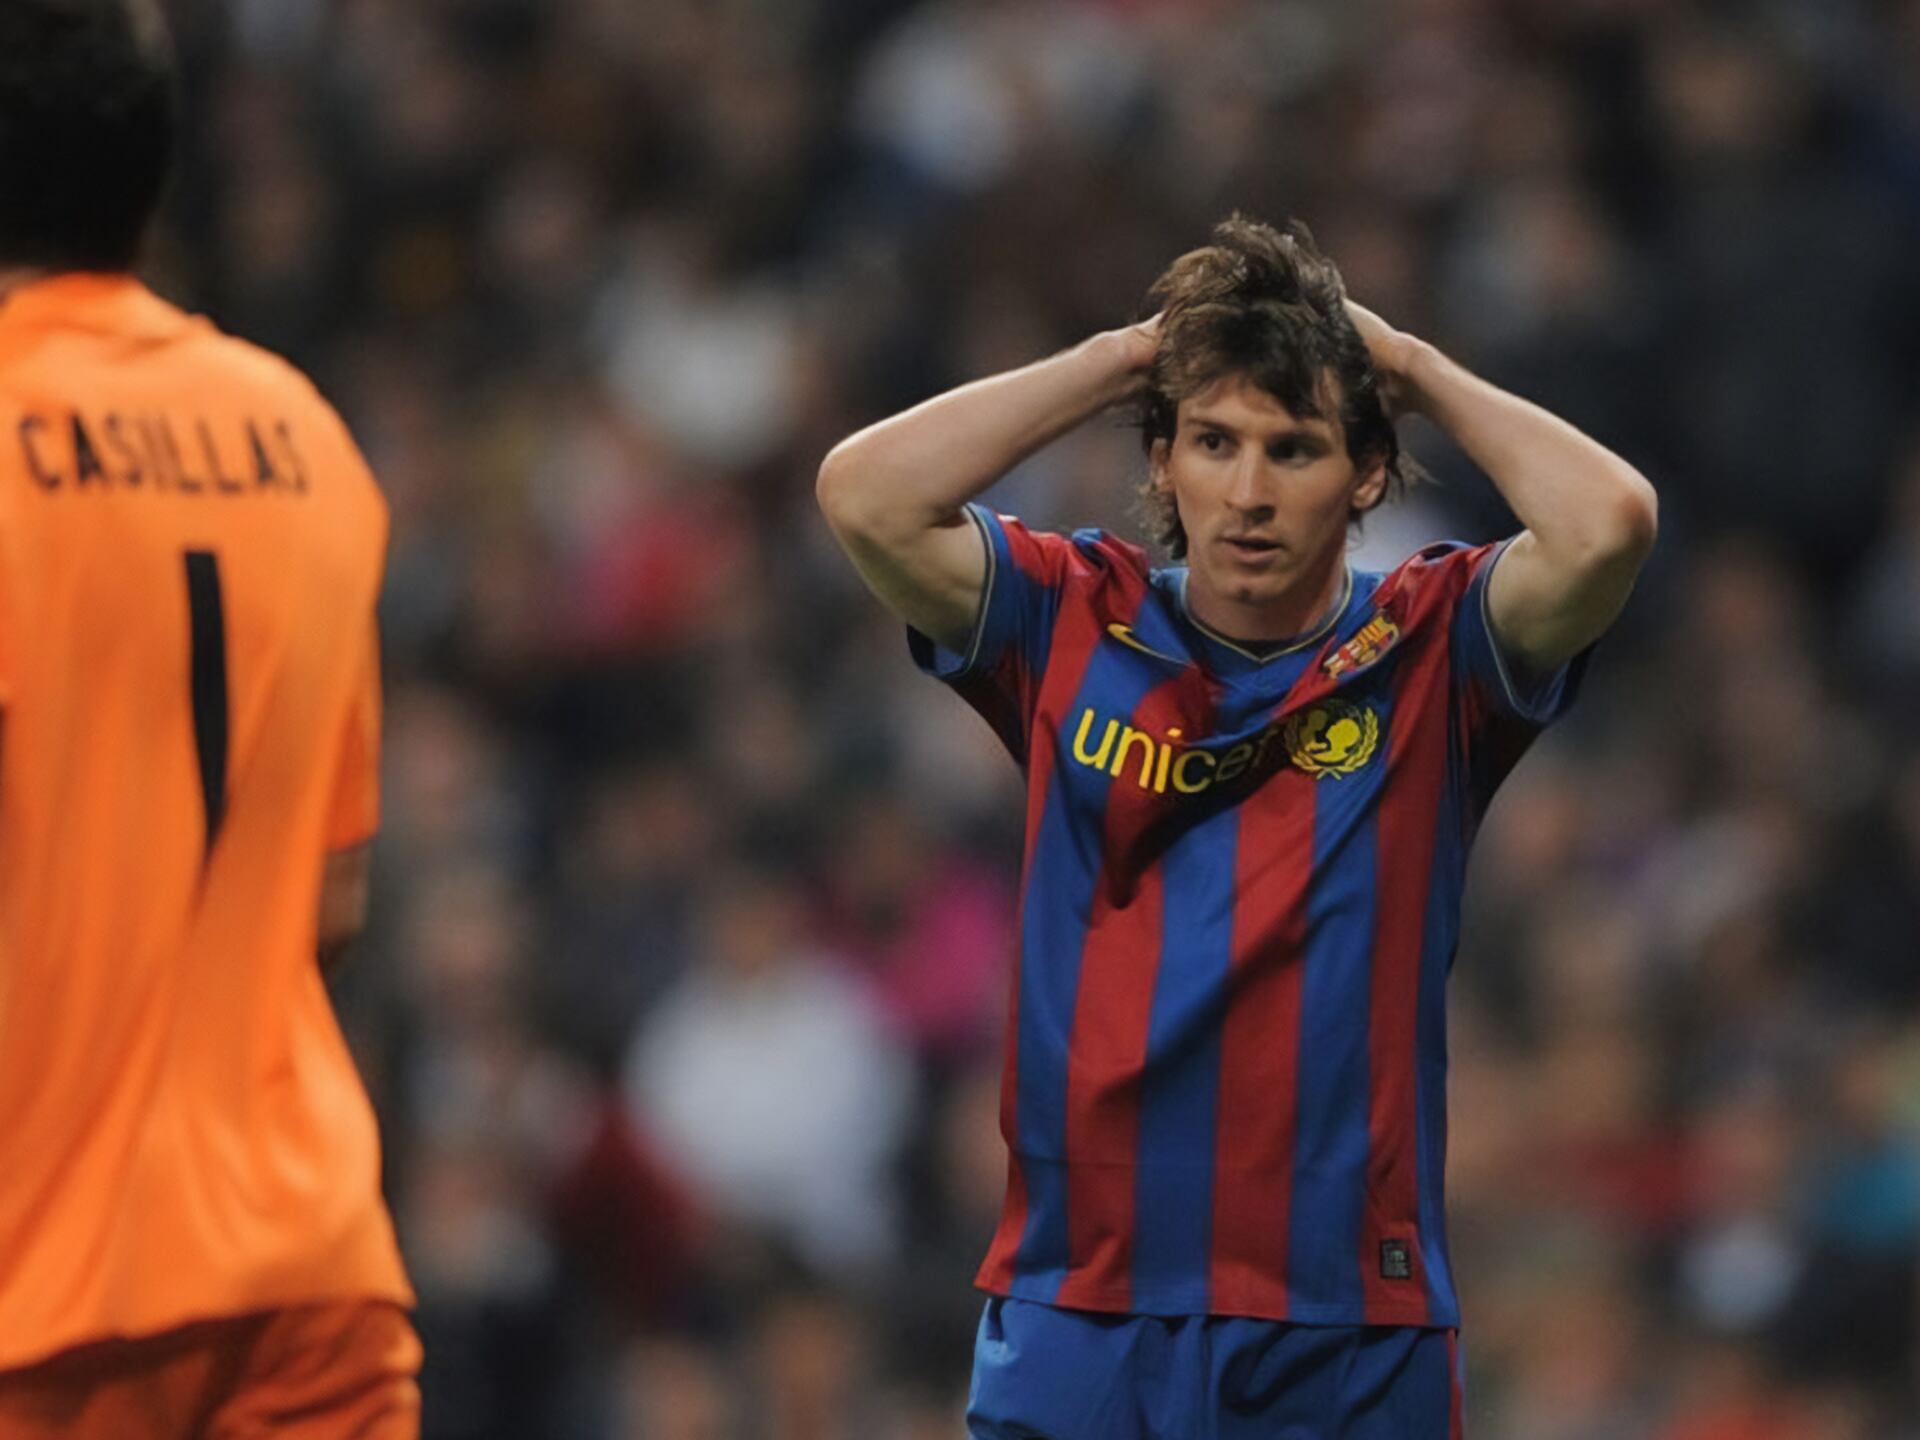 Real Madrid's illness, the reactions after Casillas' comment to Messi